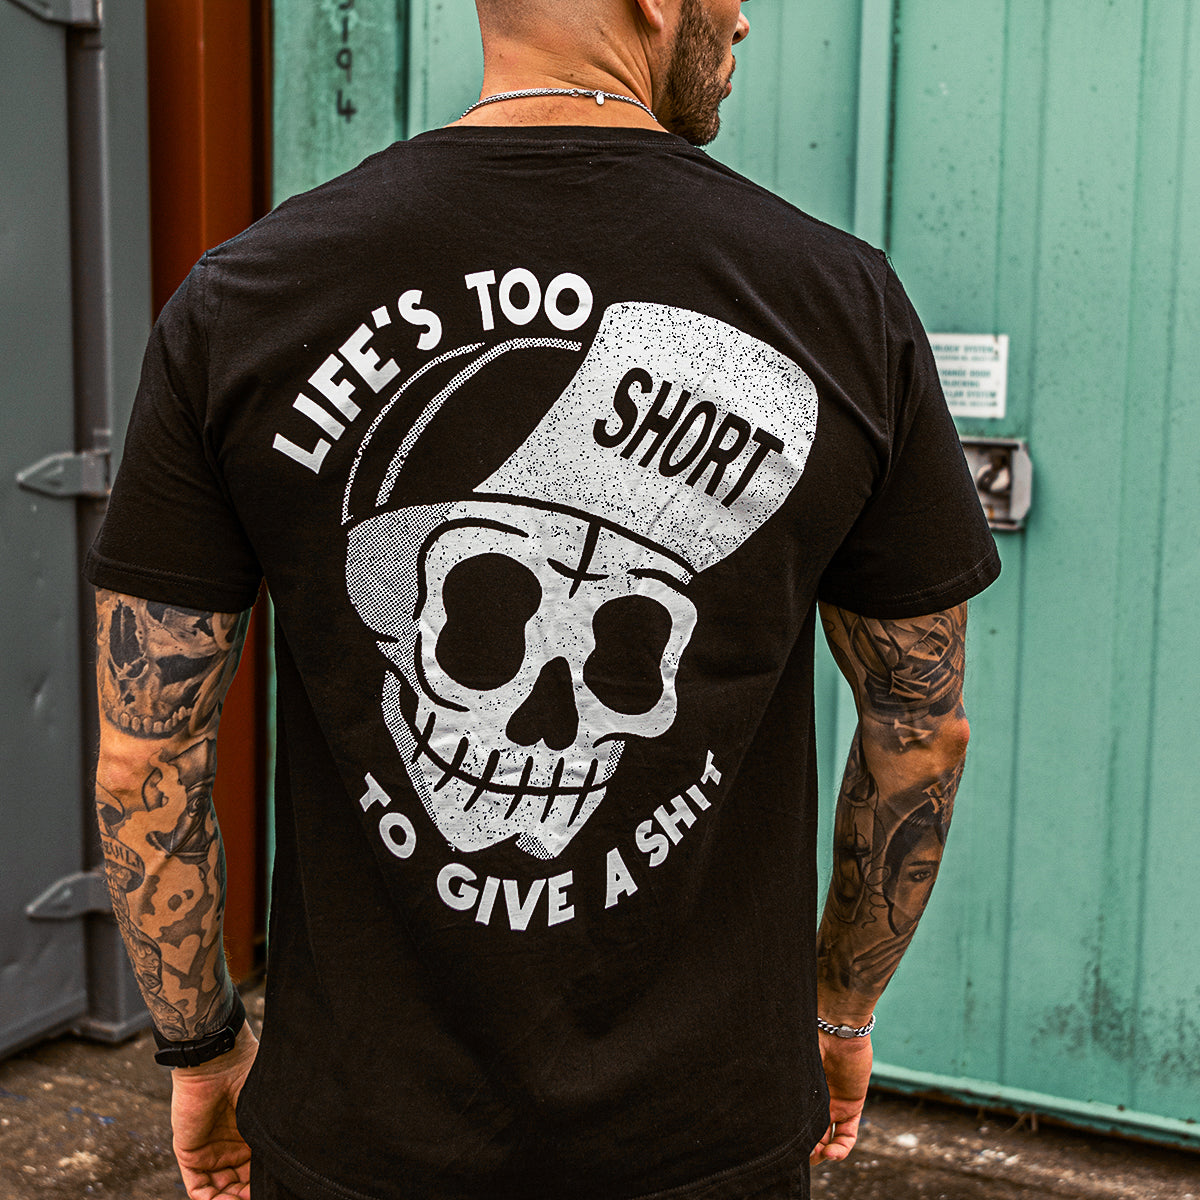 Uprandy Life Too Short To Give A Shit Skull Printed Men Casual T-Shirt - chicyea